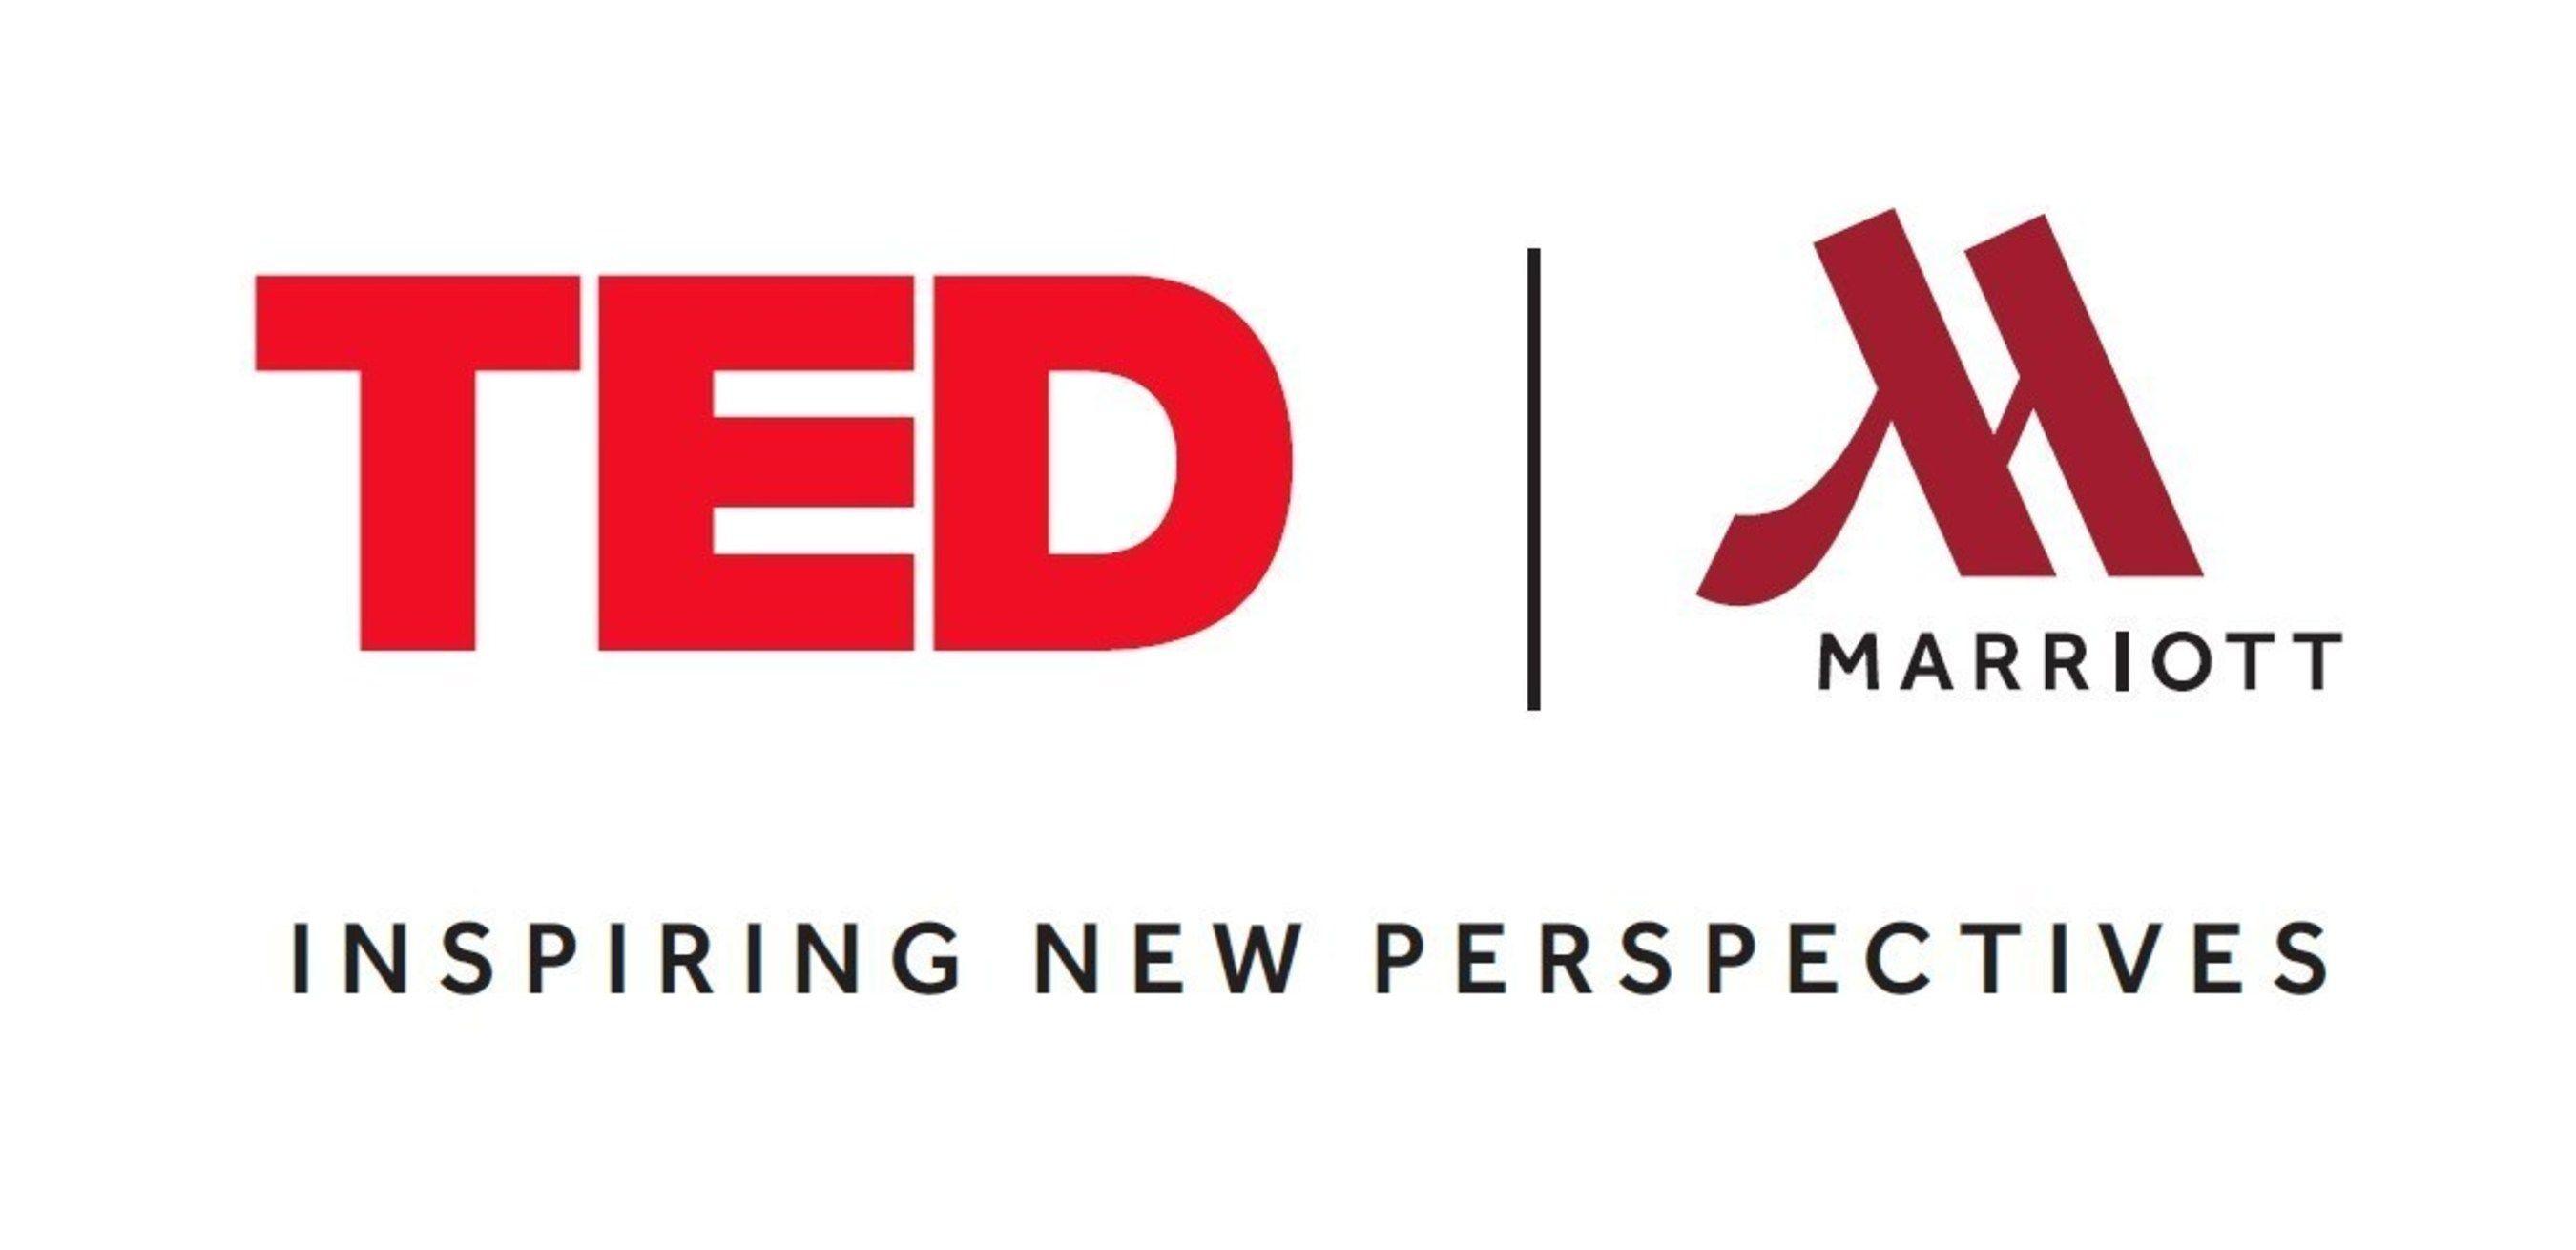 TED.com Logo - TED Talks To Travelers At Marriott Hotels